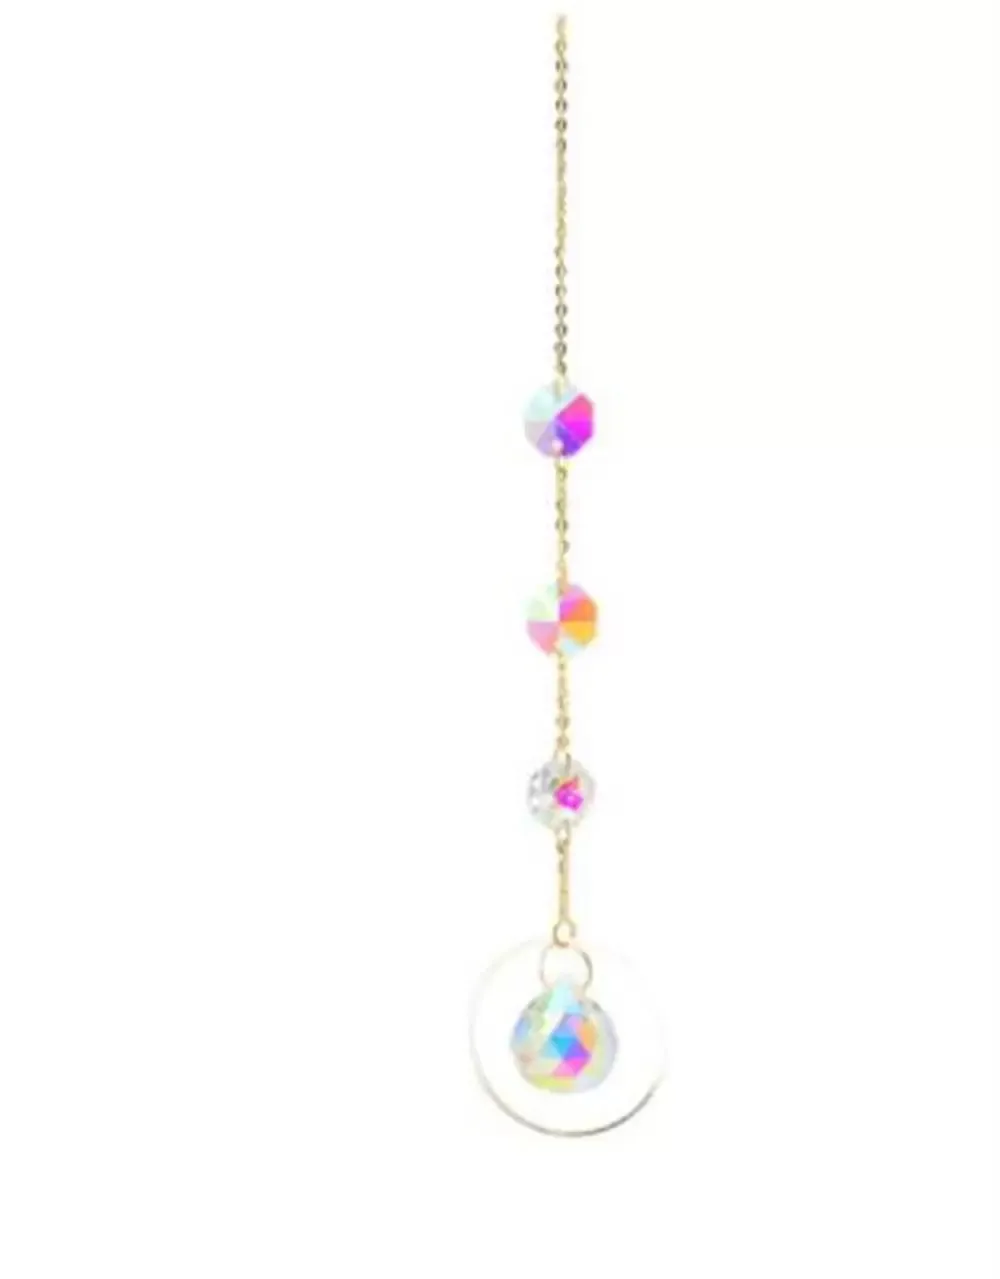 Home Party Decoration Colorful Crystals Suncatcher Hanging Sun Catcher with Chain Pendant Ornament Crystal Balls for Window